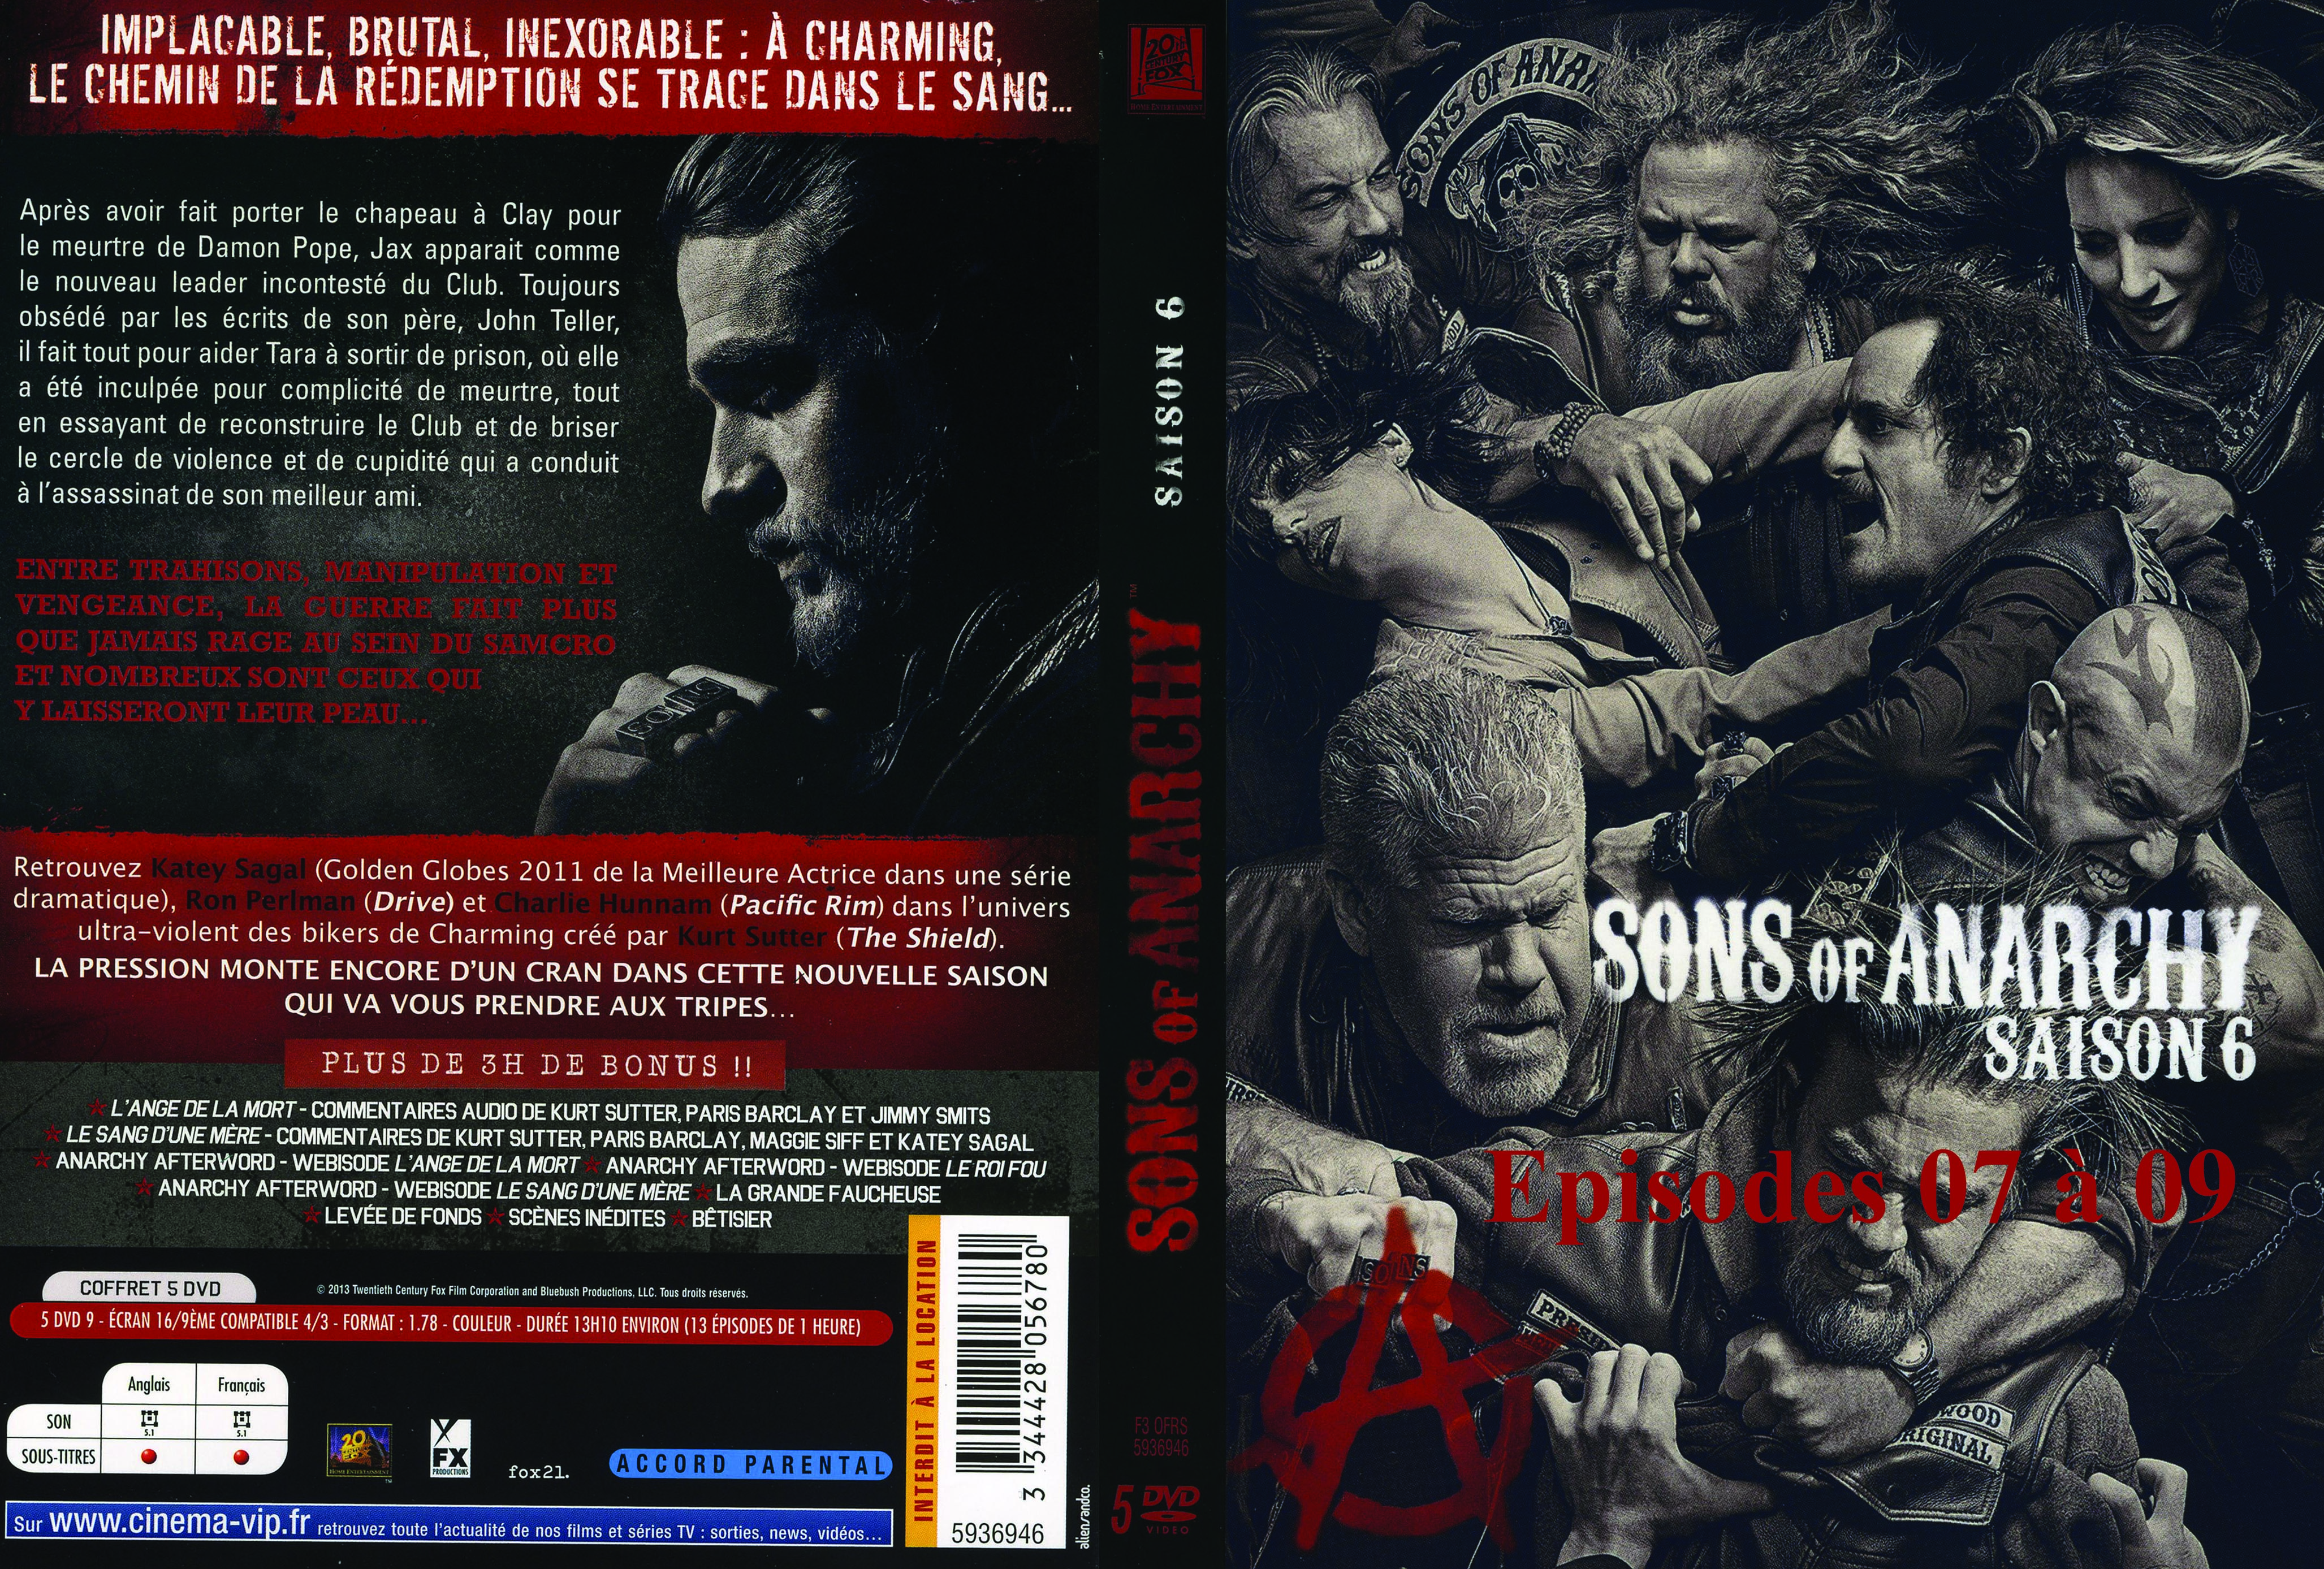 Jaquette DVD Sons of anarchy saison 6 DVD 3 custom